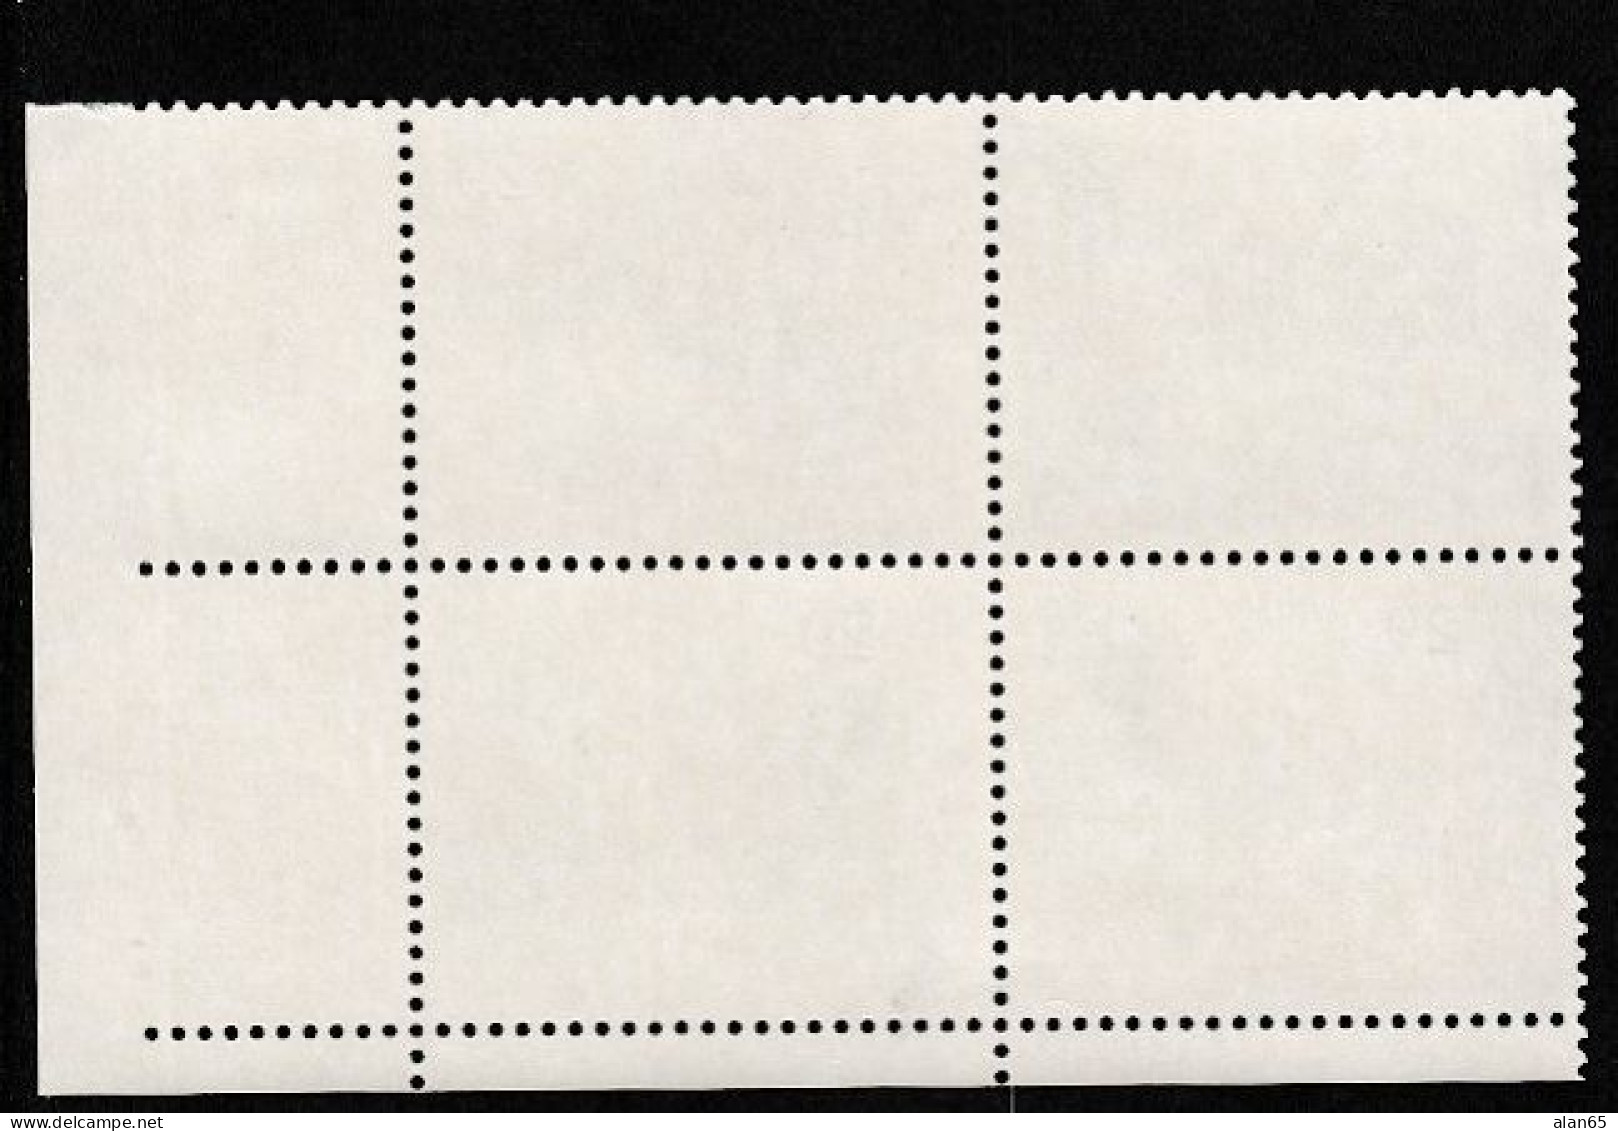 Sc#2756-2759, Sporting Horses, Equestrian Sports, Polo, Racing, 29-cent Plate Number Block Of 4 MNH Stamps - Plattennummern